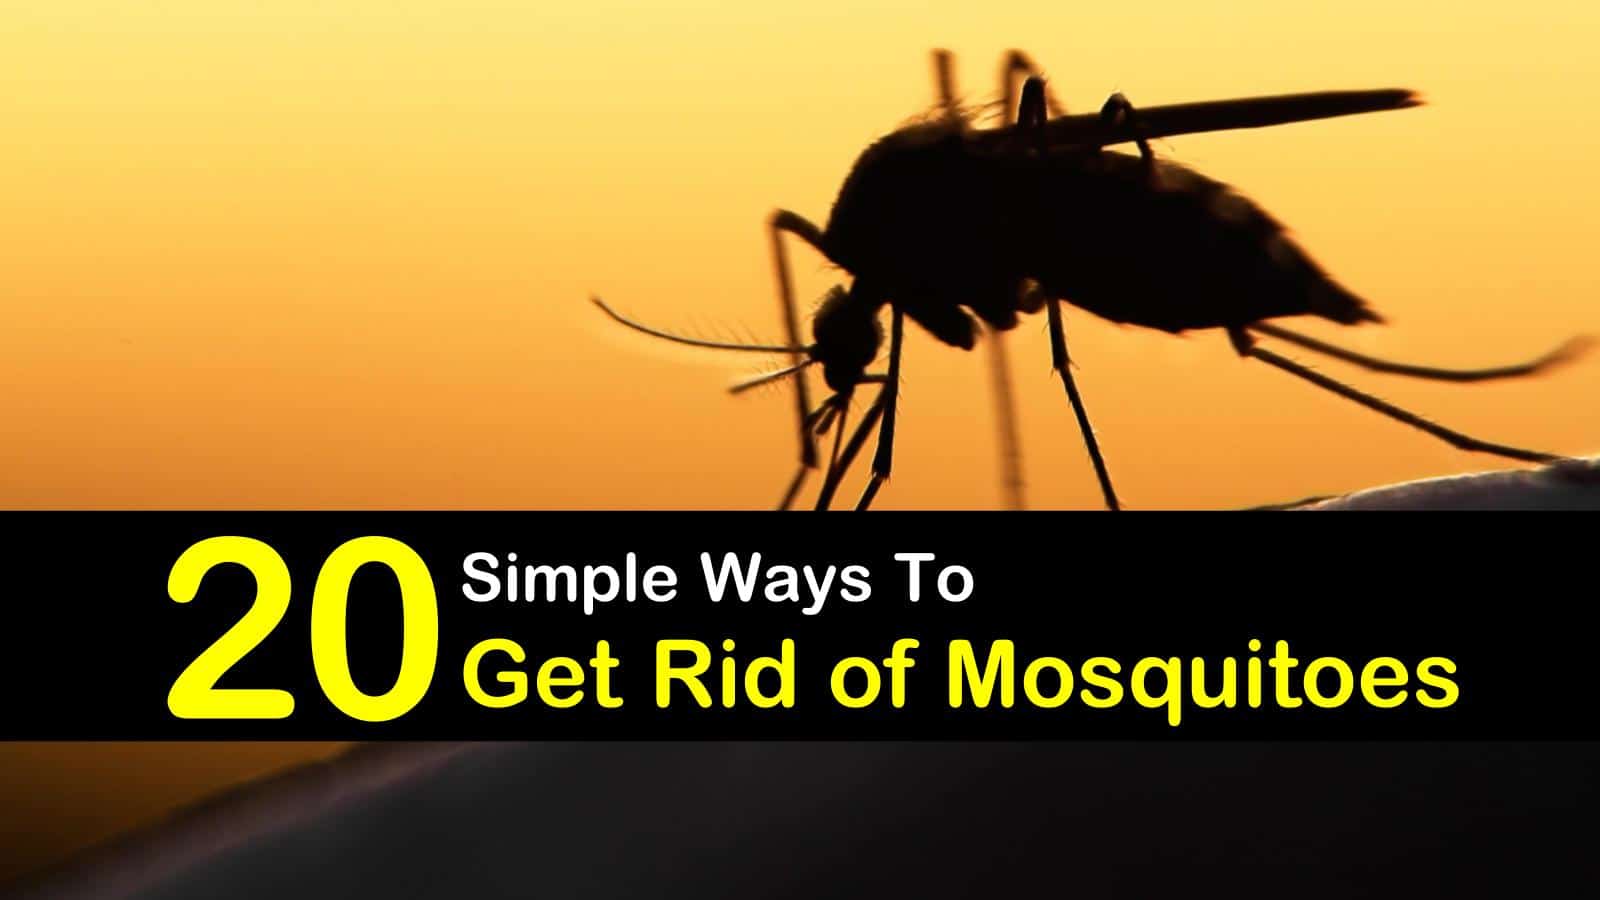 Control Mosquitoes